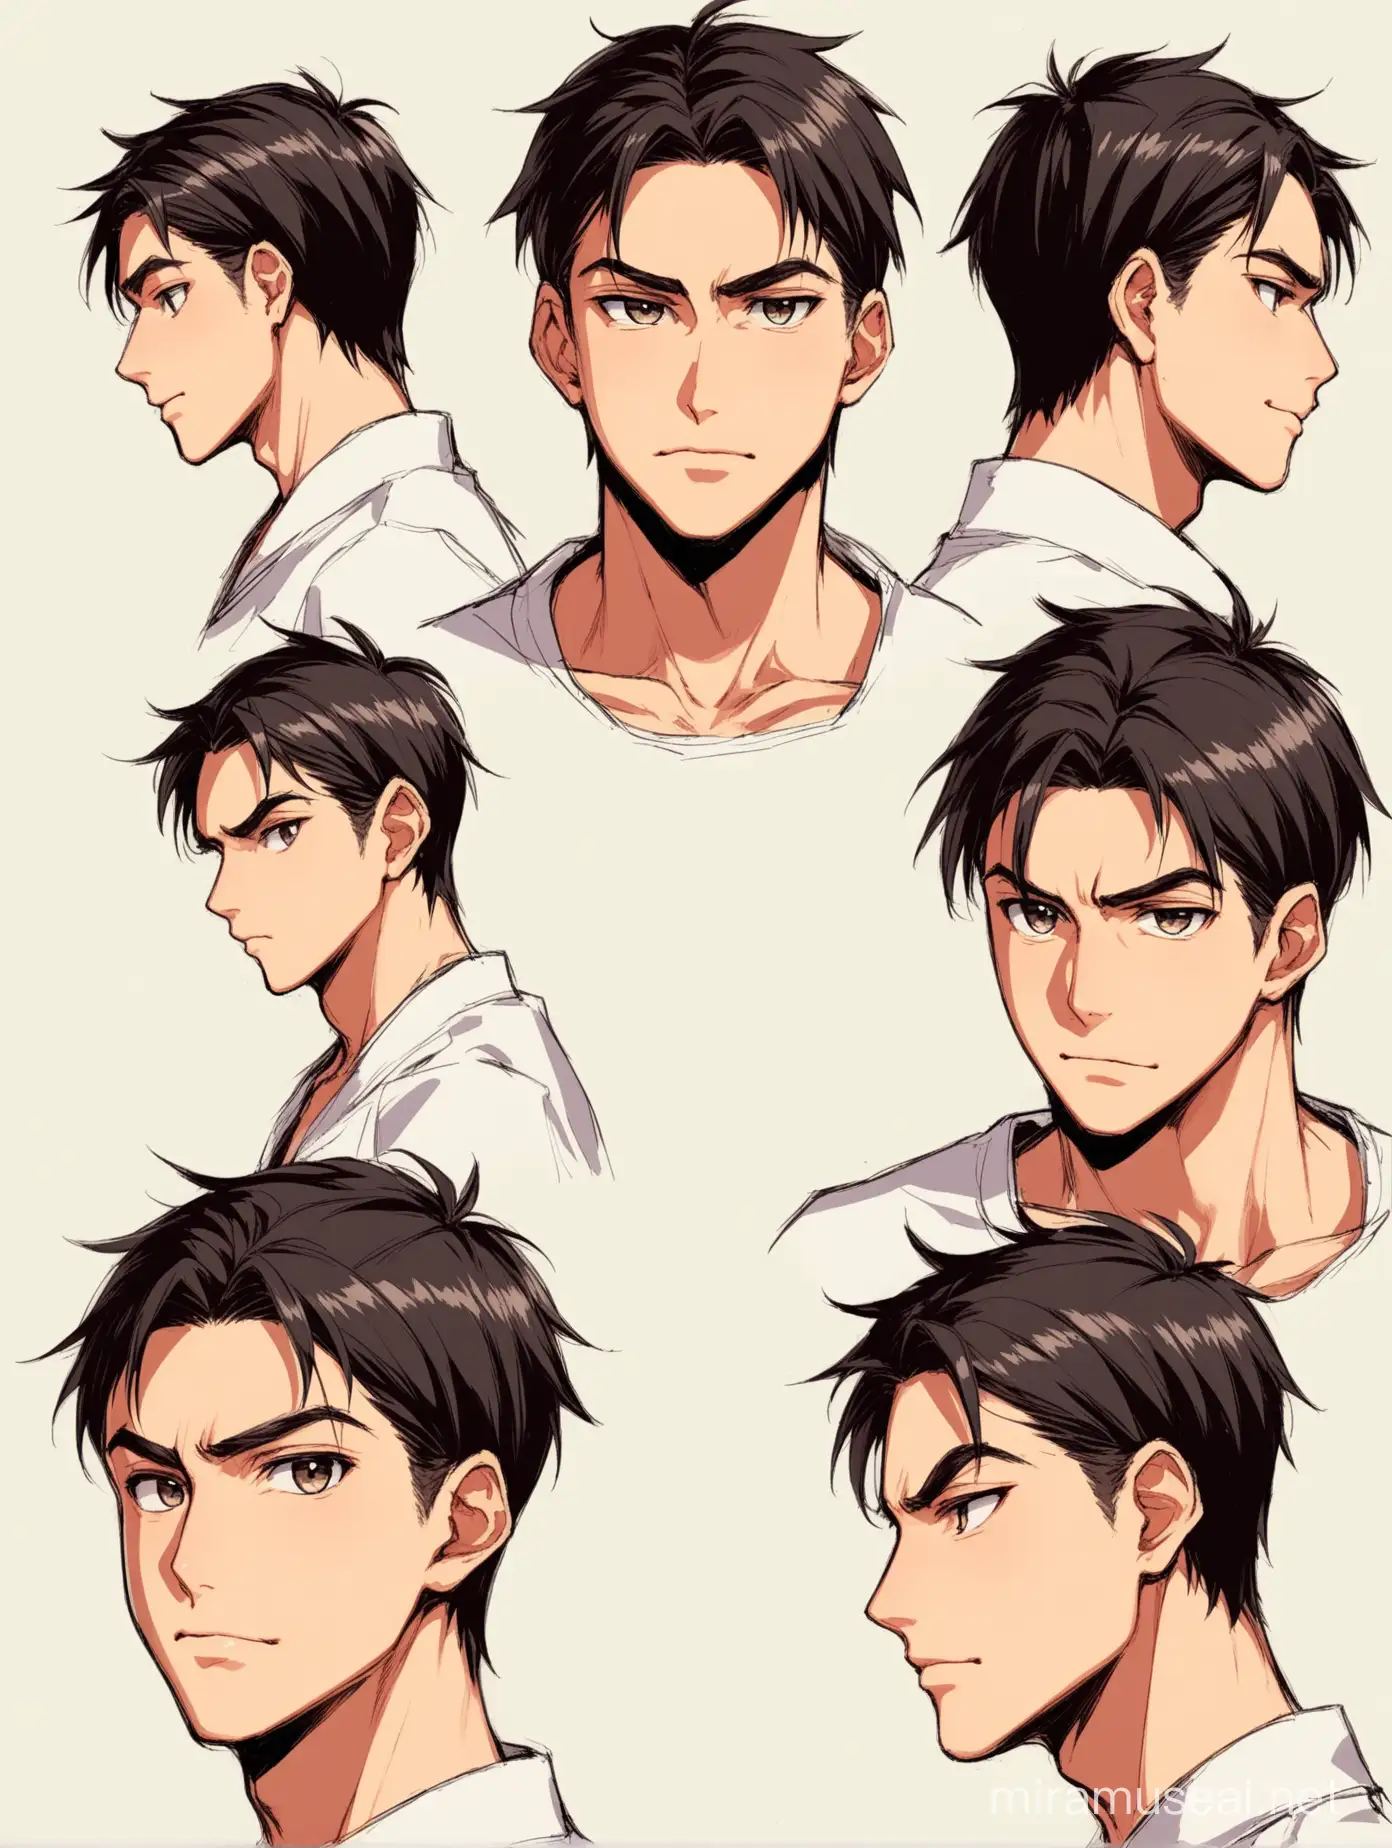 francis mosses from that's not my neighbour as a hot anime man in different cool face angles